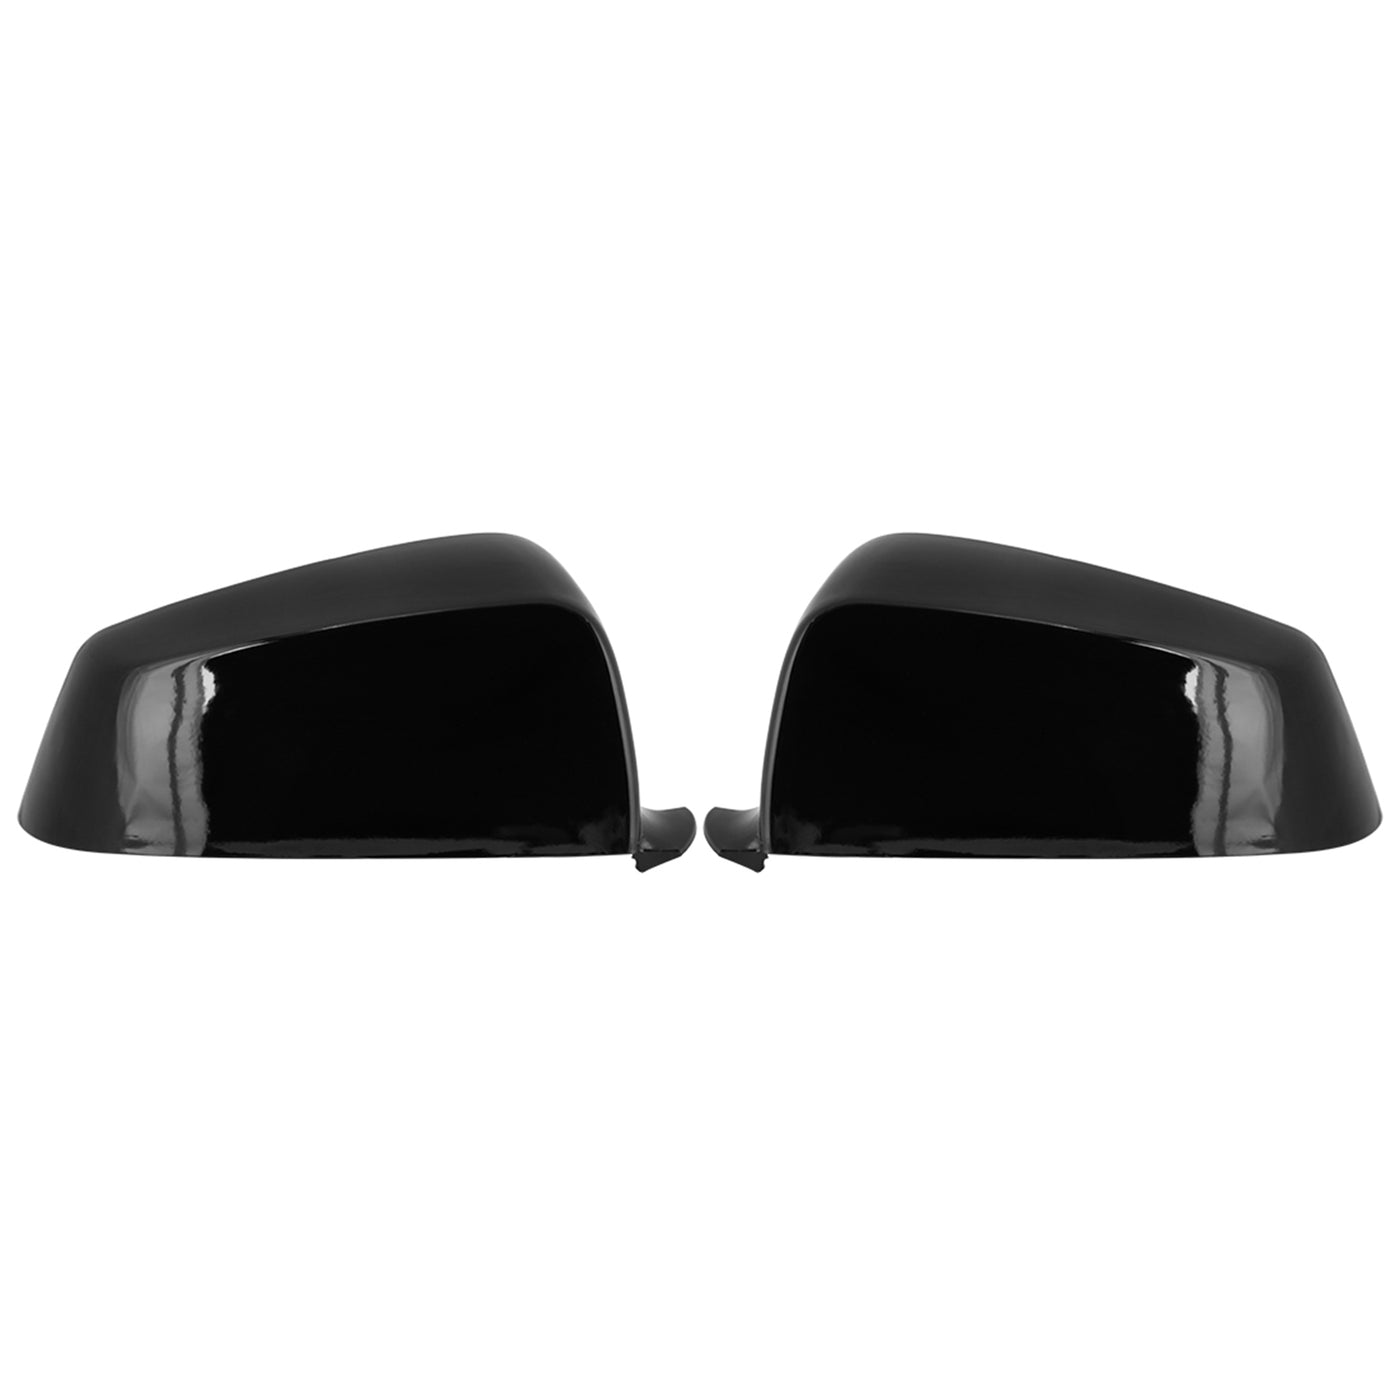 X AUTOHAUX Pair New Exterior Rear View Mirror Housing Door Wing Mirror Covering Cap Glossy Black for BMW 5 Series E60 2008-2013